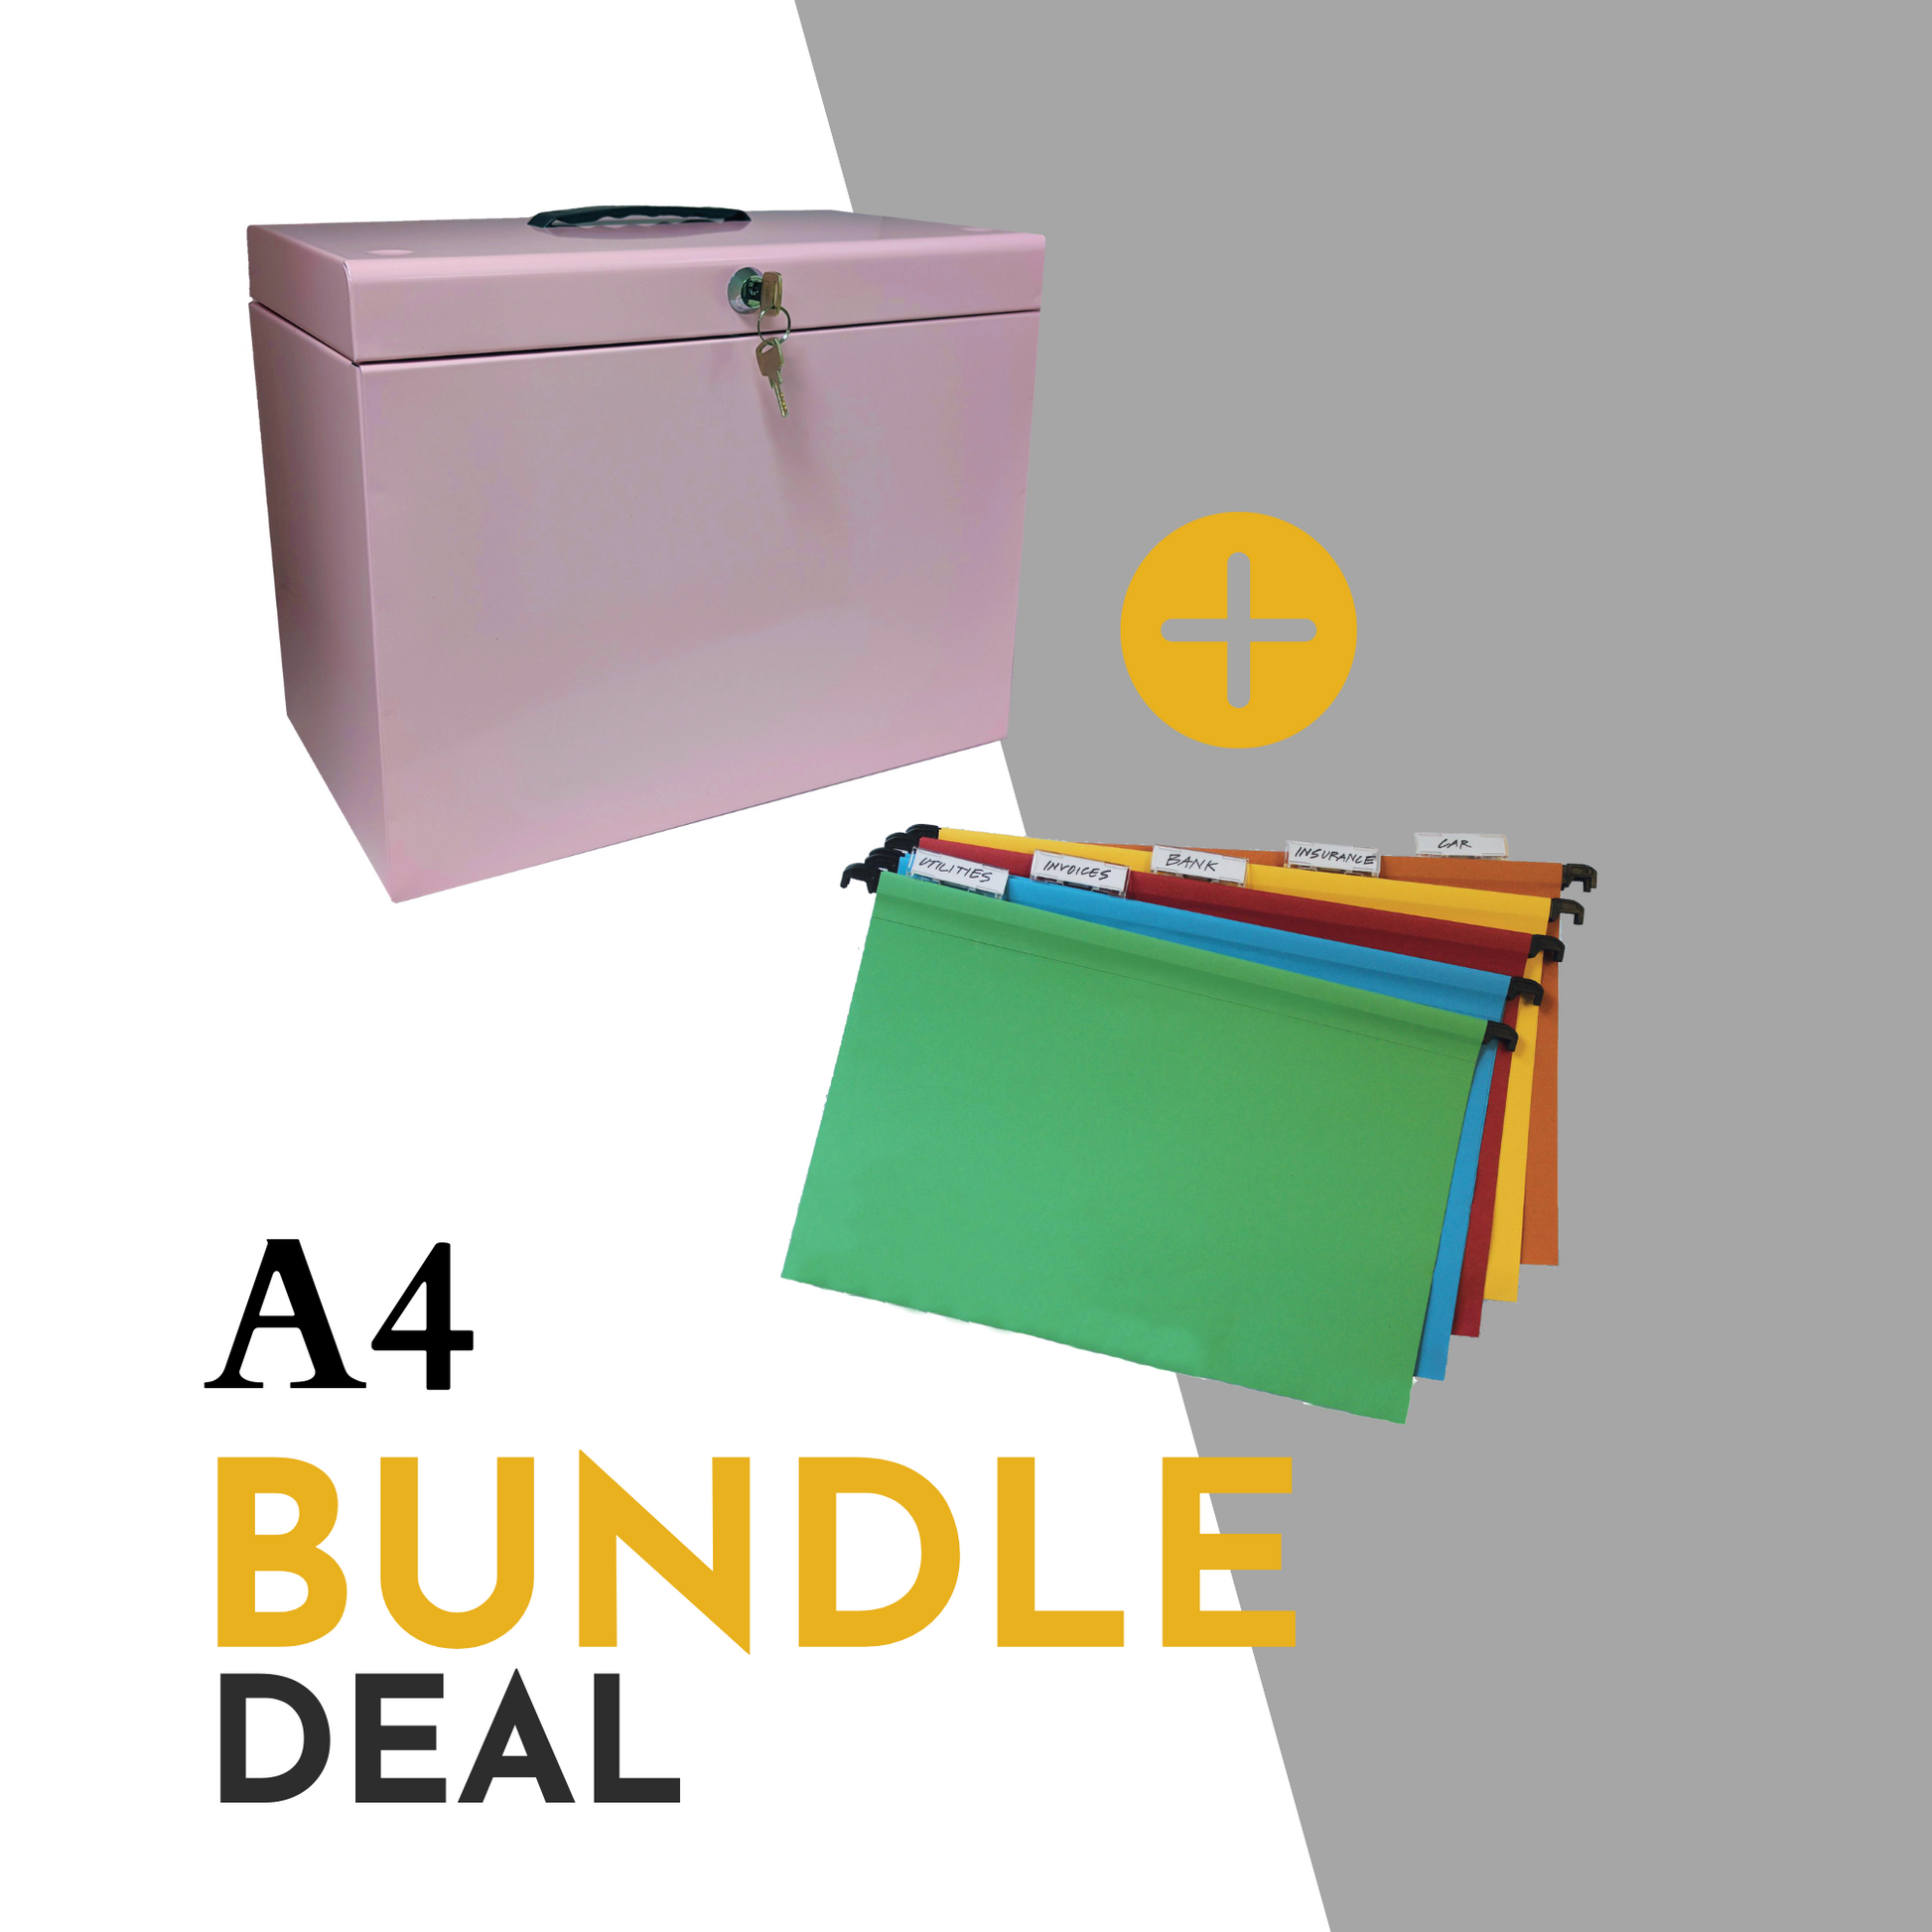 Promotional image for an A4 file storage bundle deal, including a pastel pink file box with a handle and key lock, plus an additional set of 10 assorted color A4 suspension files with index tabs, showcasing an organized filing solution.